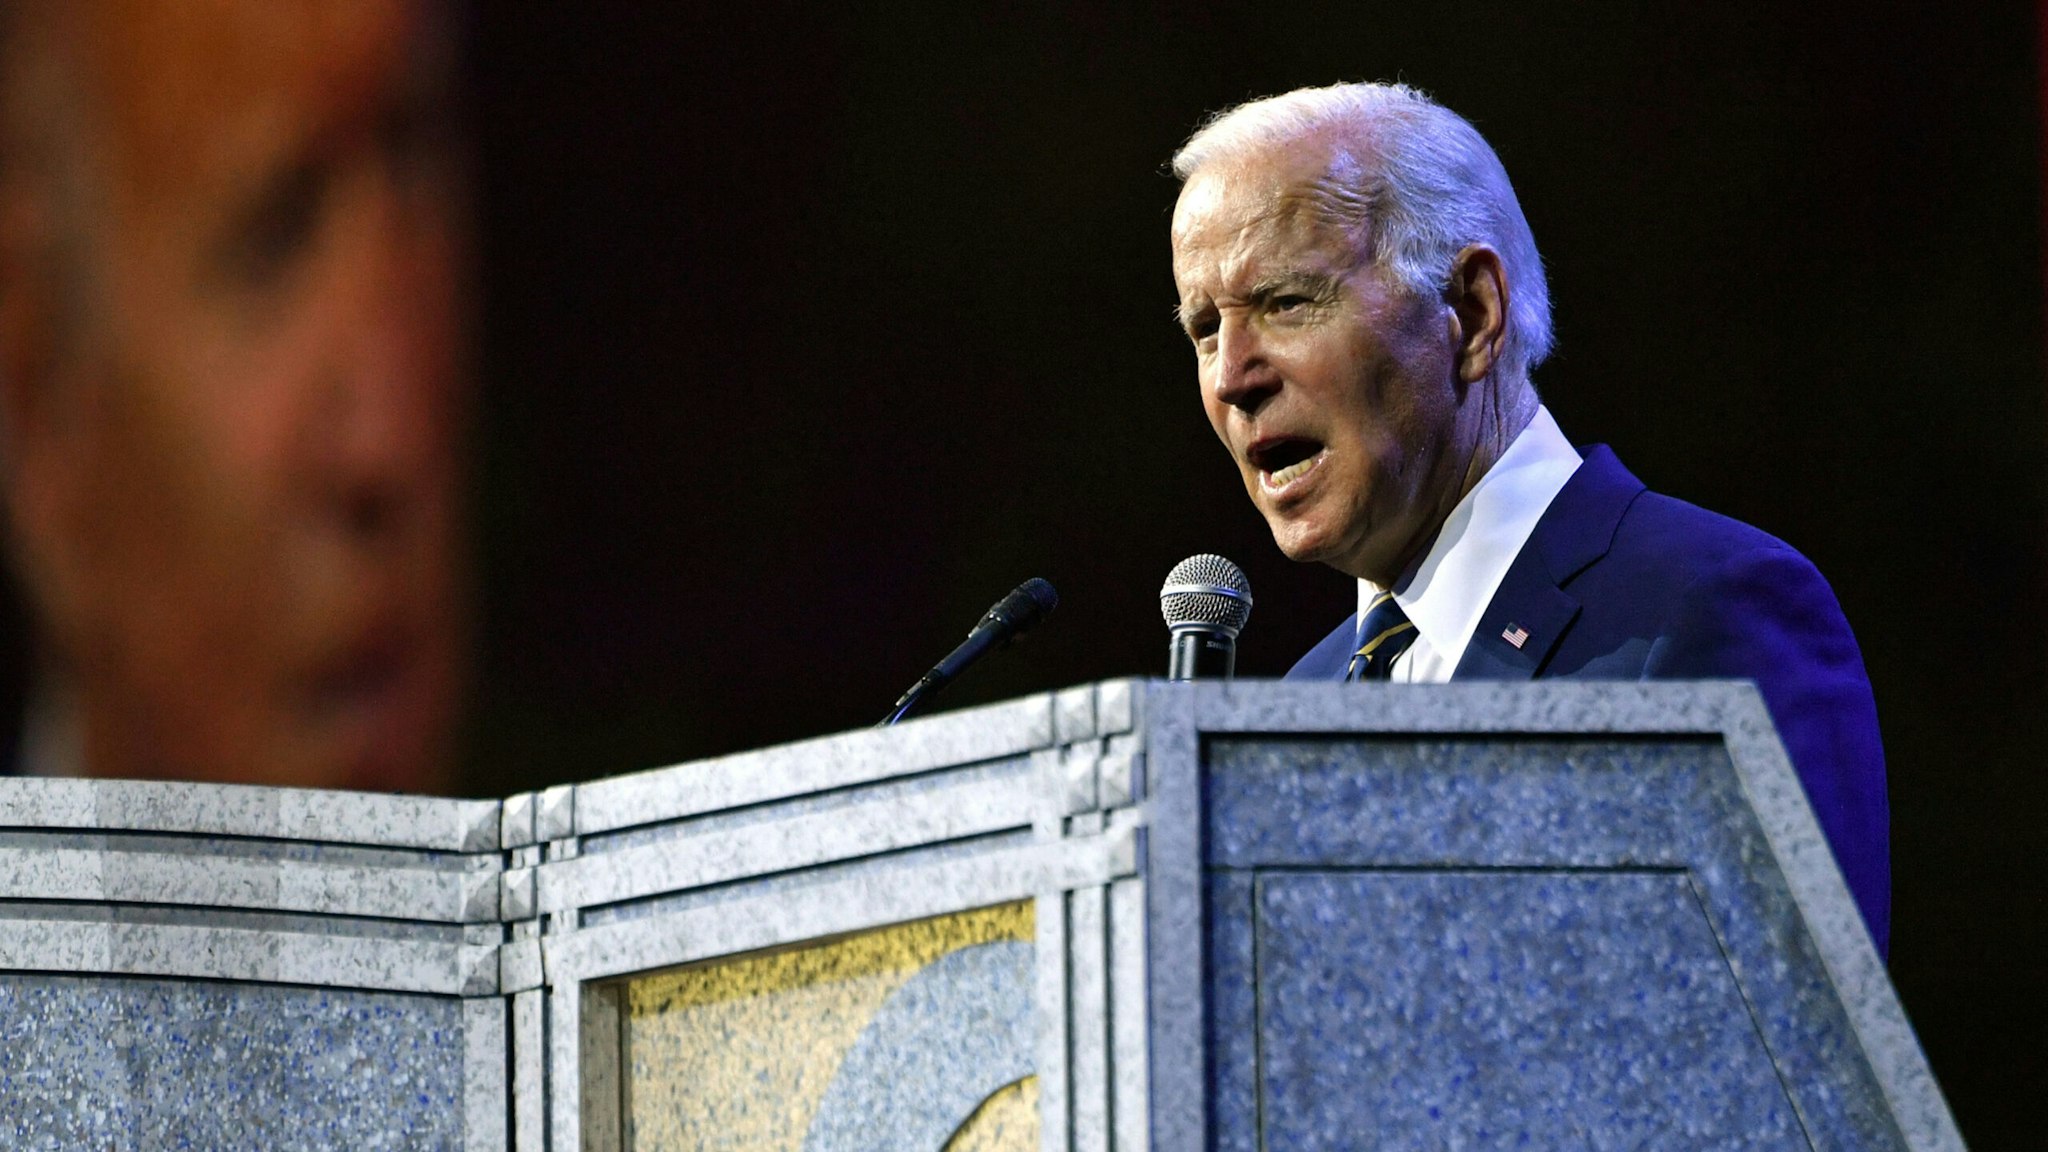 US President Joe Biden addresses the 40th International Brotherhood of Electrical Workers (IBEW) International Convention at McCormick Place convention center in Chicago, Illinois on May 11, 2022.